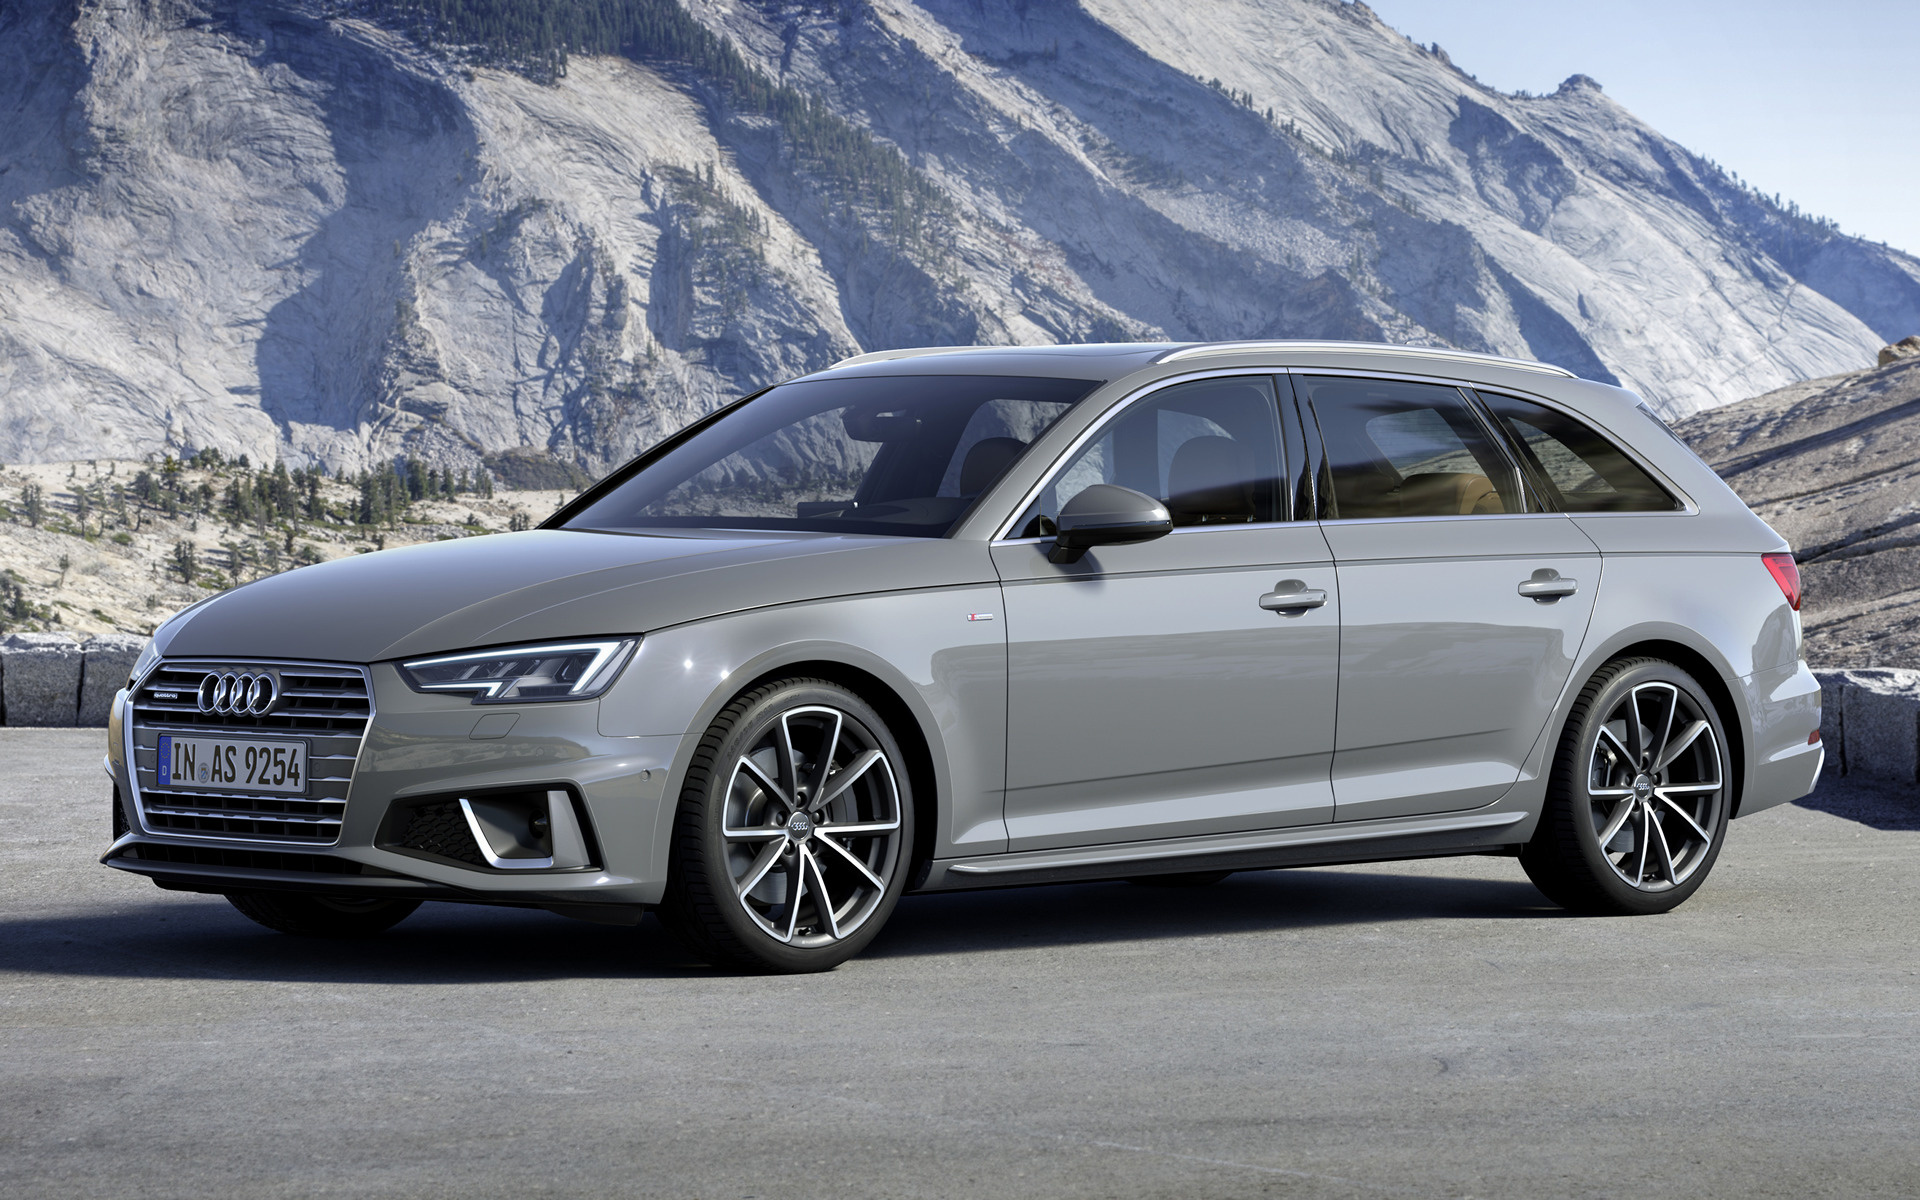 2018 Audi A4 Avant S Line Wallpapers And Hd Images Car Pixel